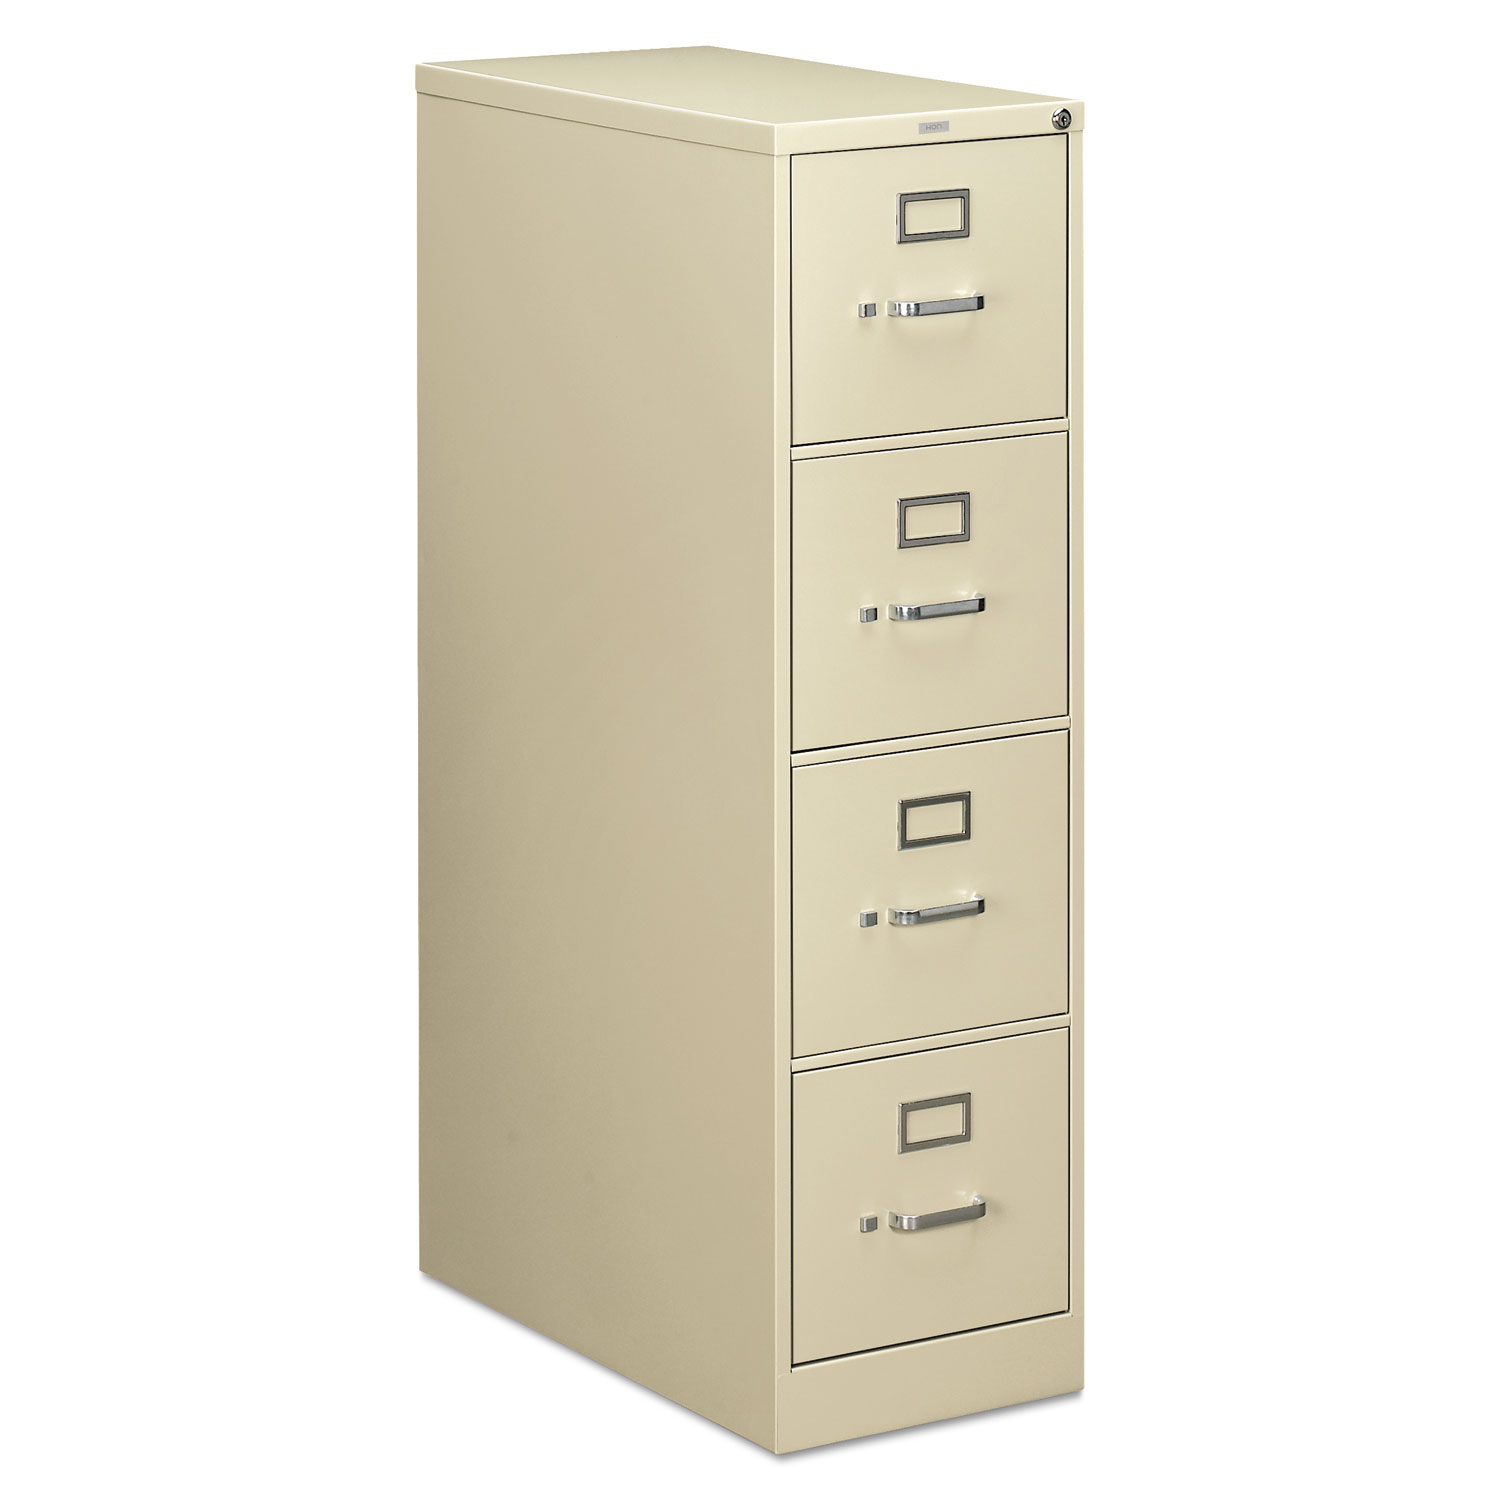 210 Series Four-Drawer, Full-Suspension File, Letter, 28-1/2d, Putty